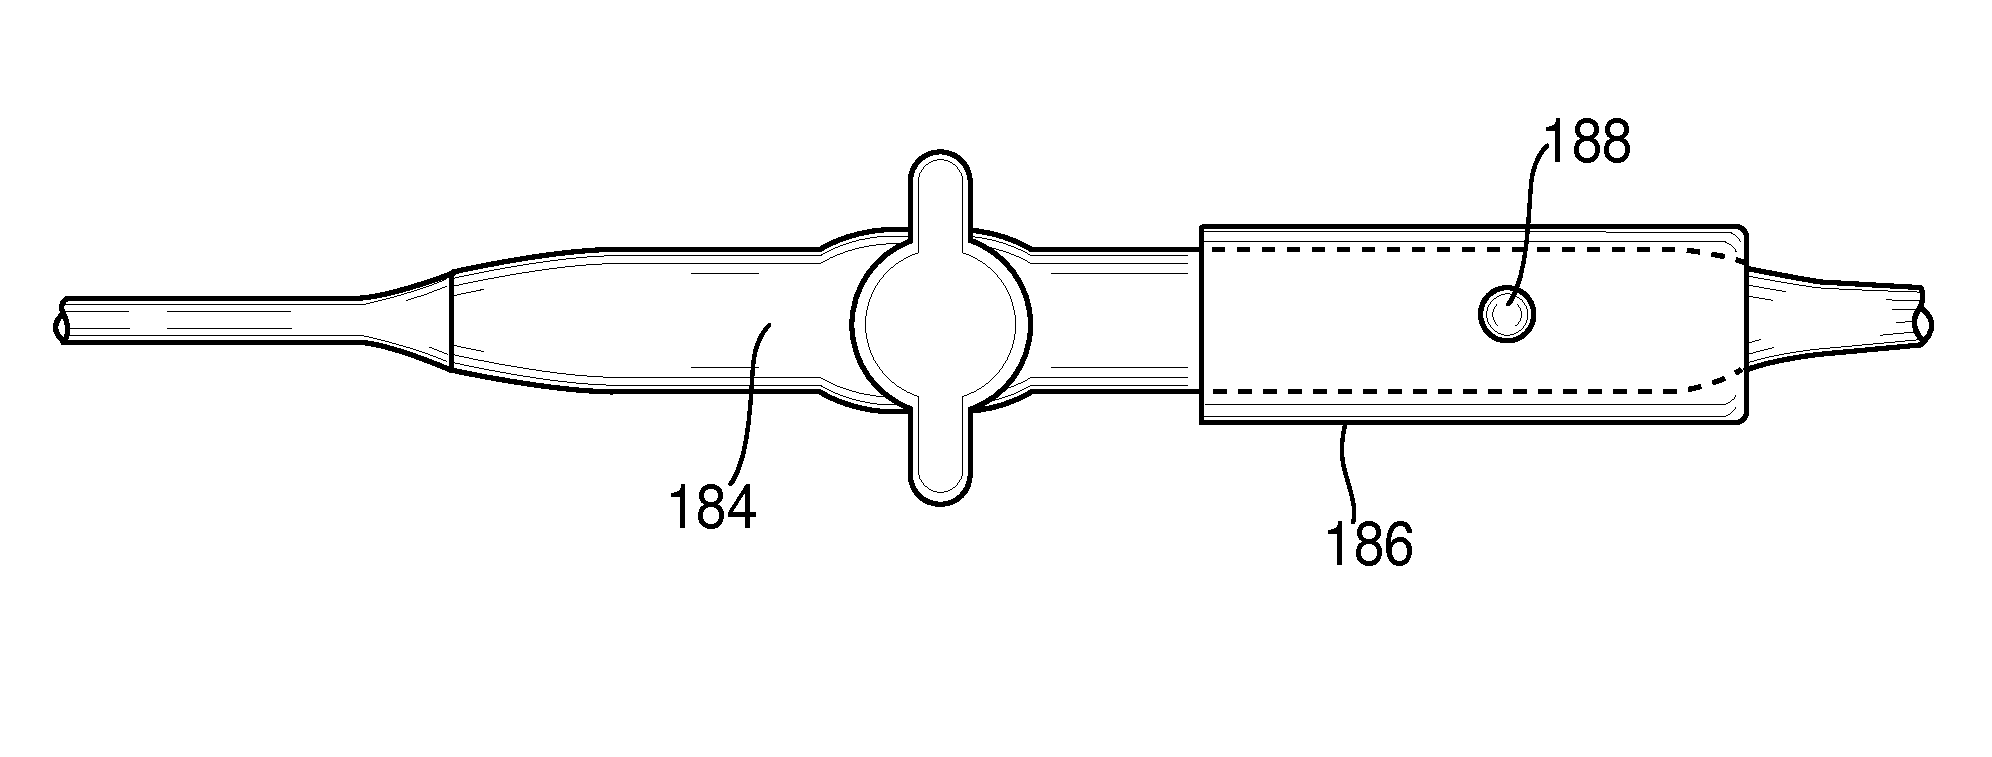 Ablation catheter system with safety features